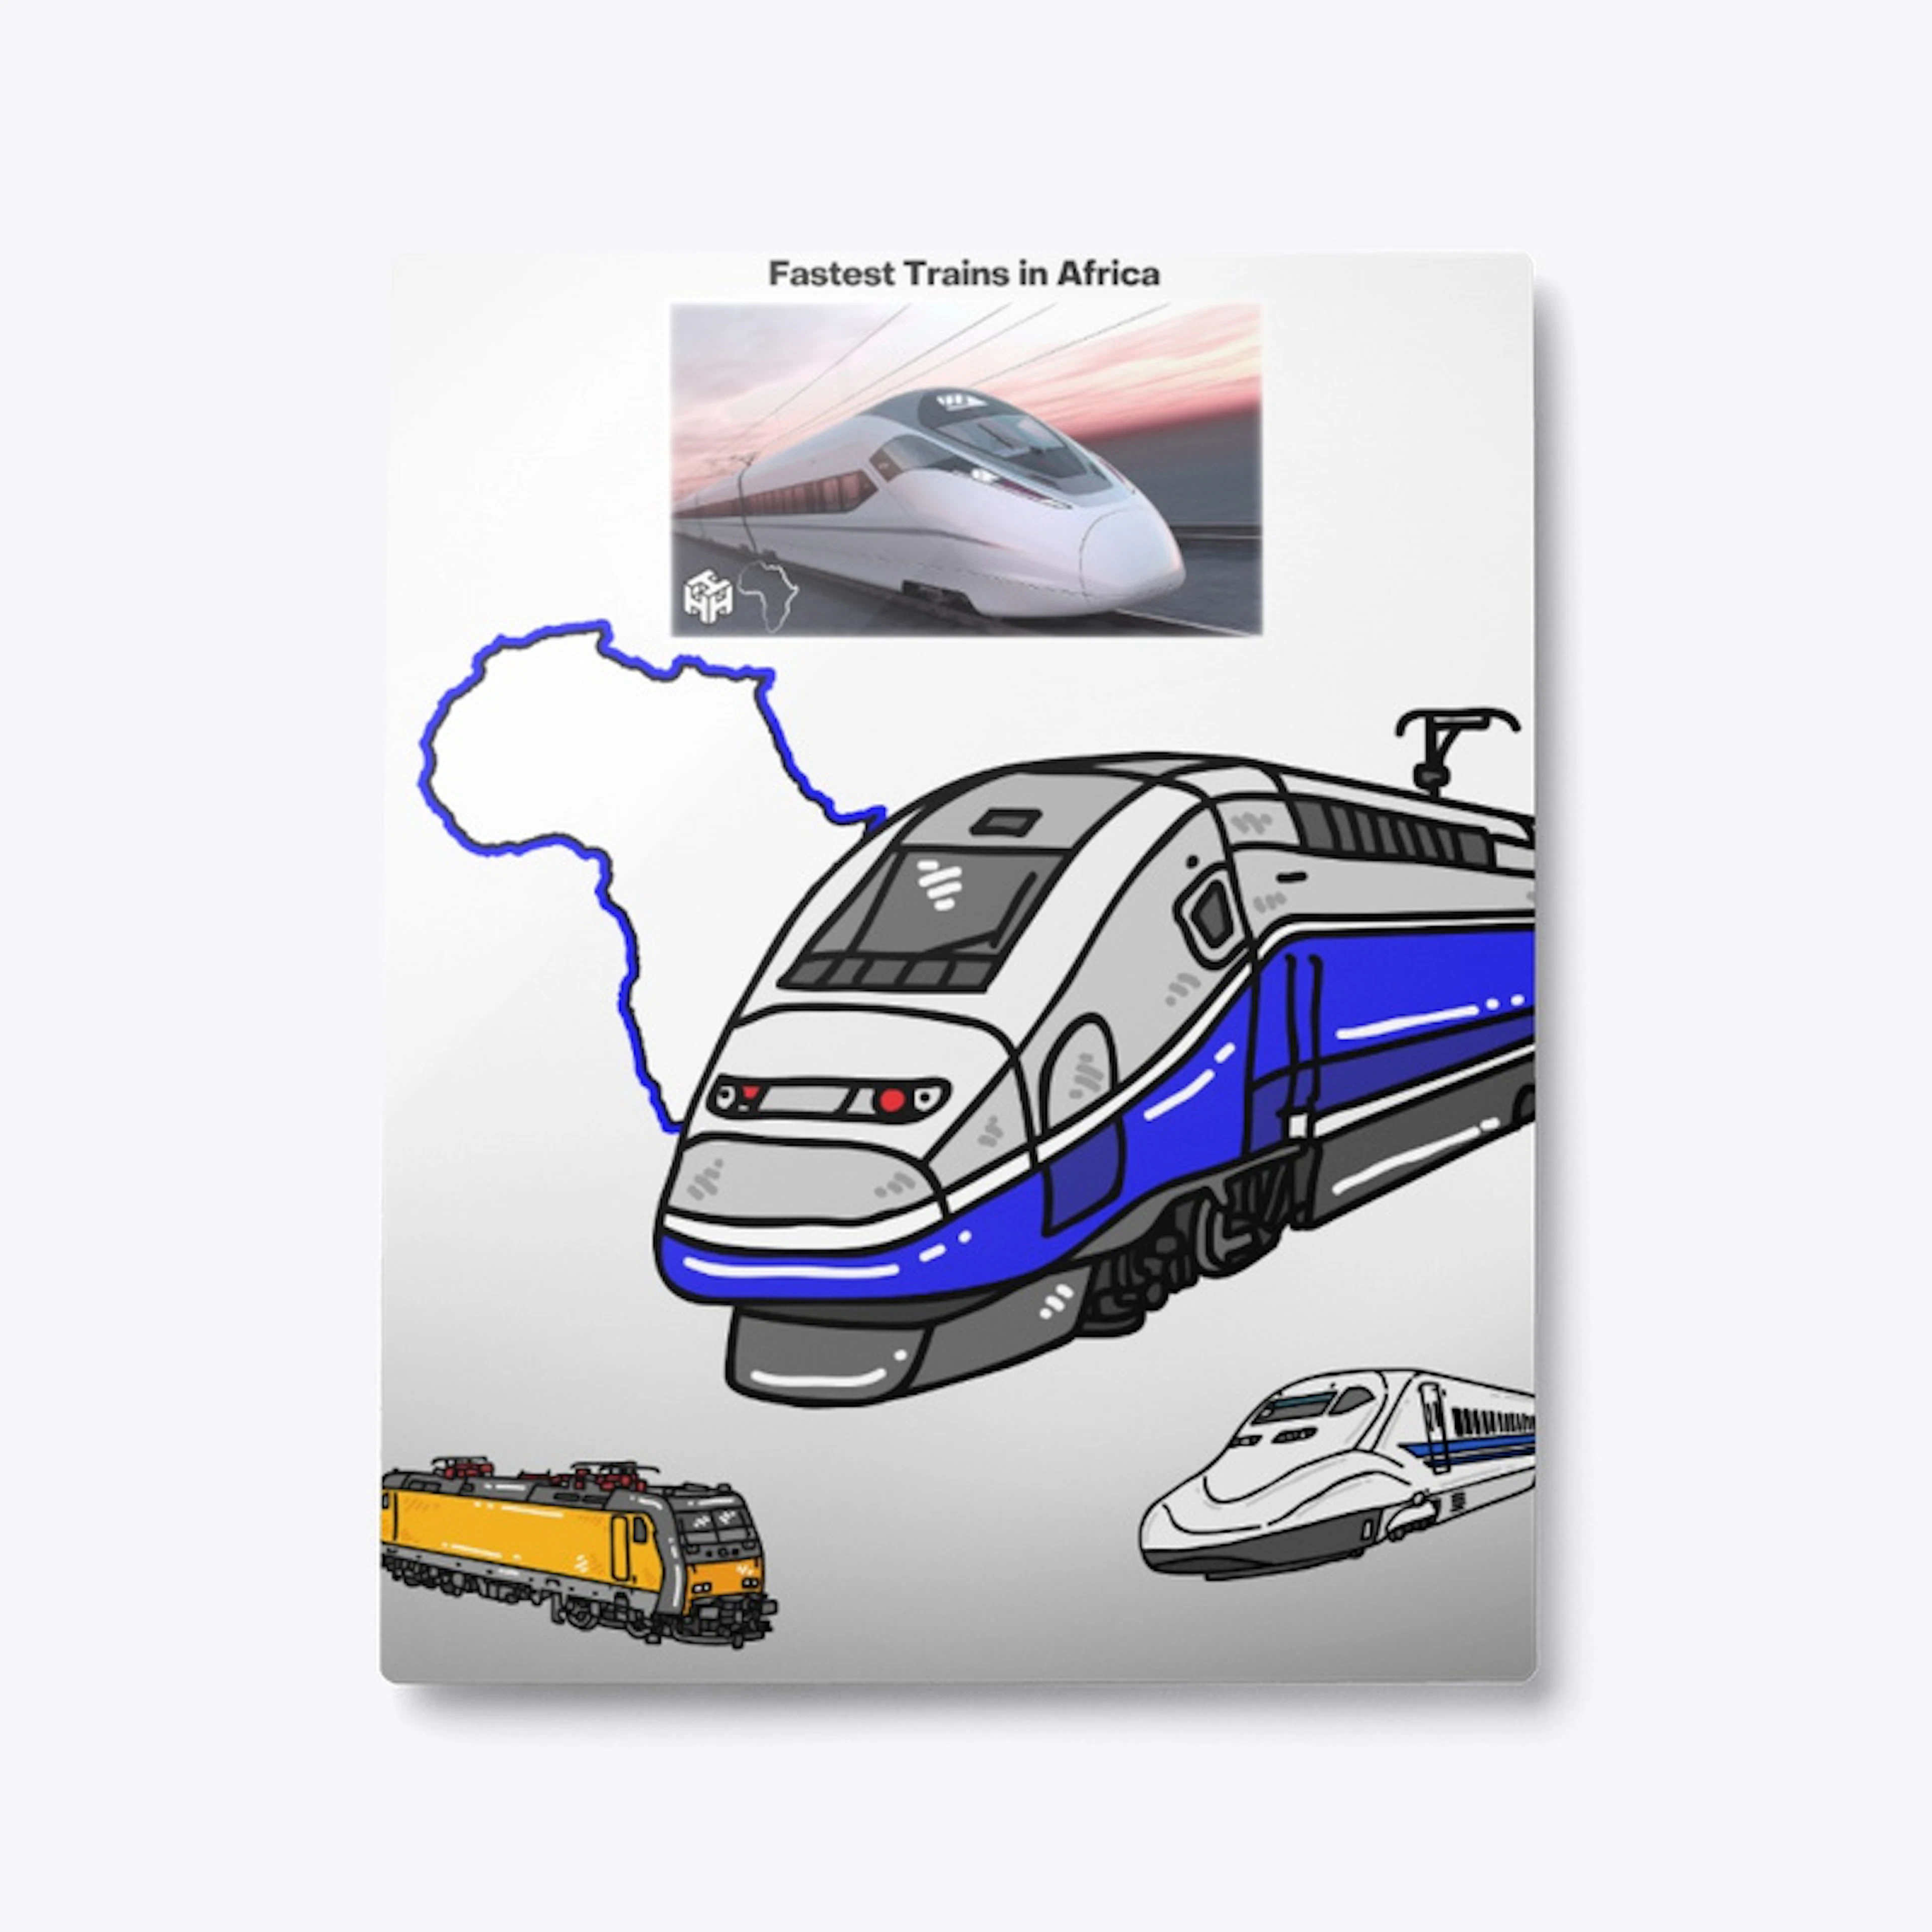 Fastest Trains in Africa - Video Poster